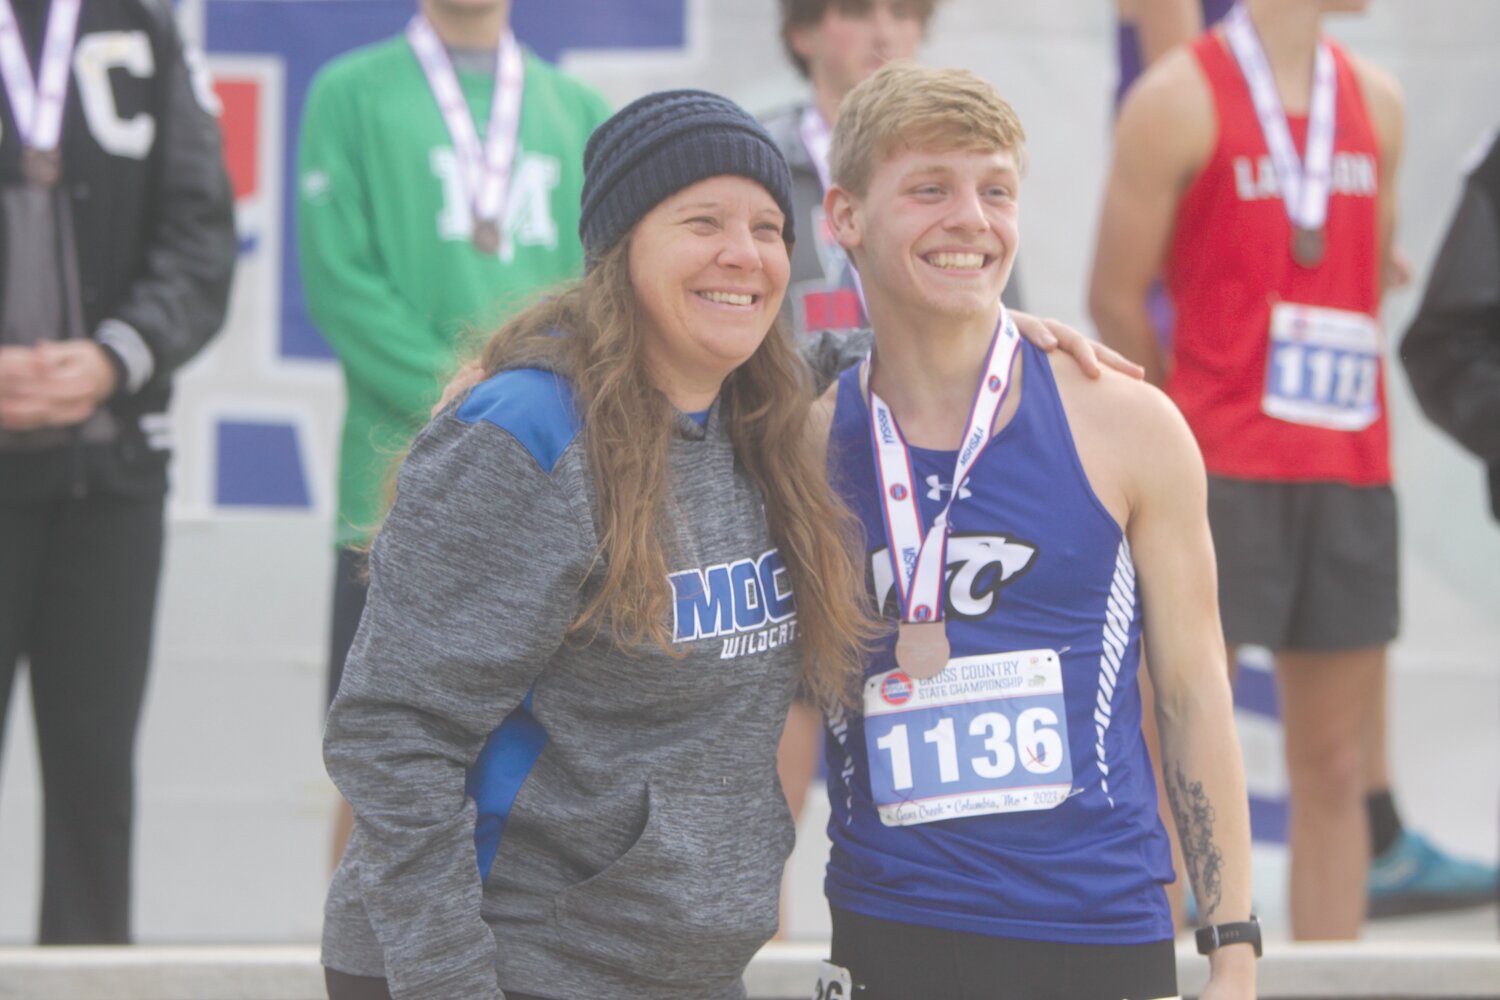 Montgomery County junior Jadrian Thurmon poses with coach Chasity Rodgers during the Class 1 boys state cross country meet awards ceremony on Nov. 4. Thurmon placed 15th for his first all-state cross country medal.